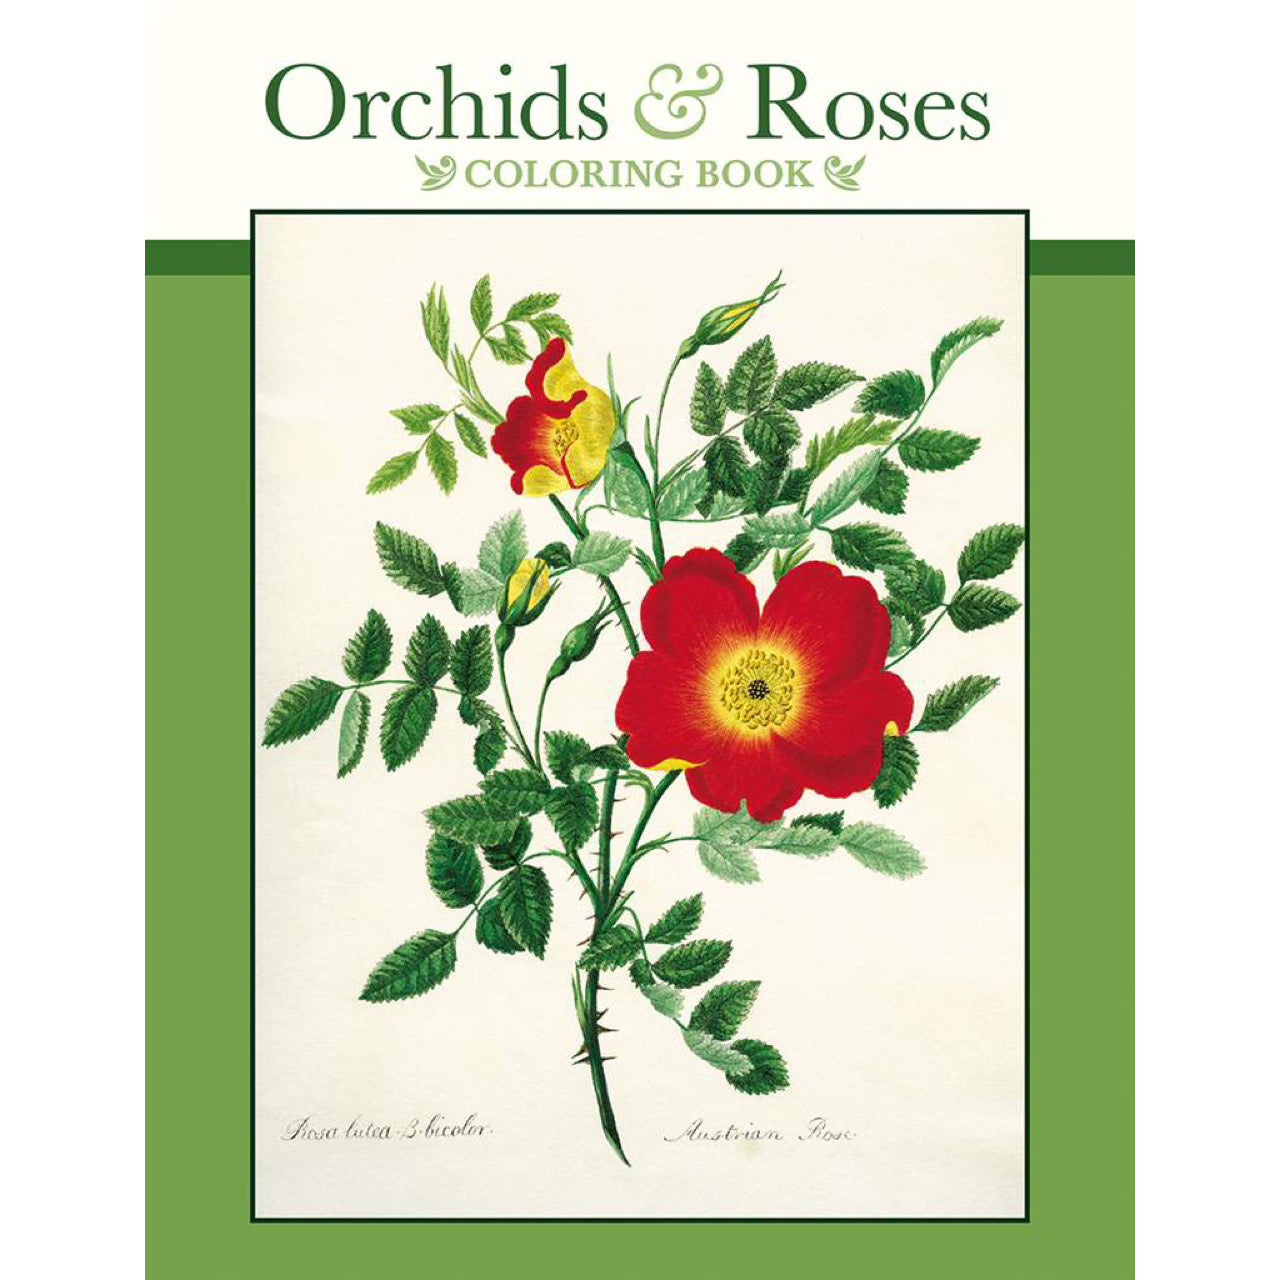 Orchids & Roses - Coloring Book